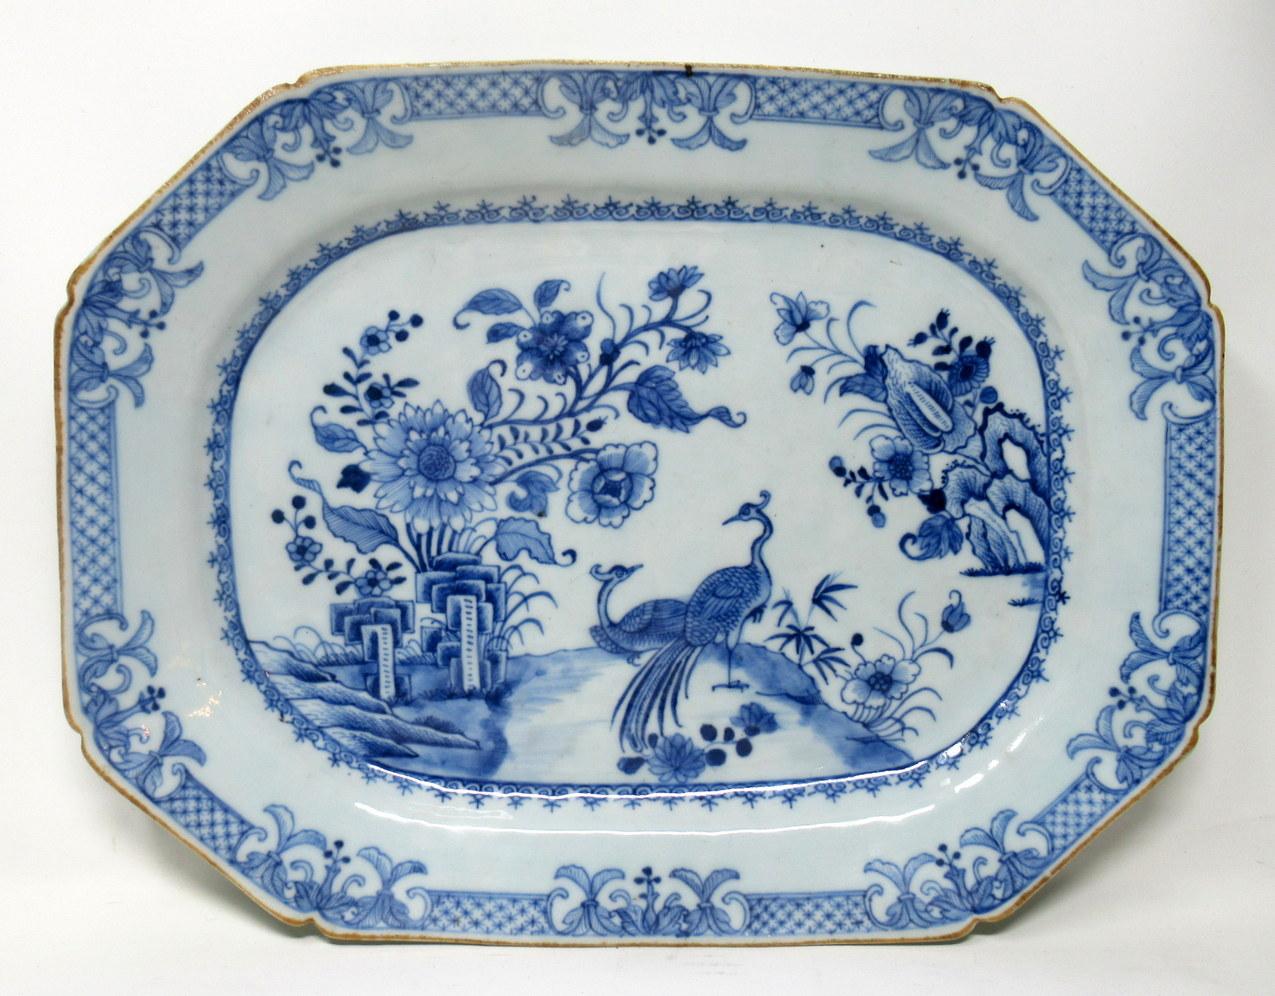 Chinese Export Chinese Canton Porcelain Blue White Plates Chargers Qianlong, 18th Century, Pair